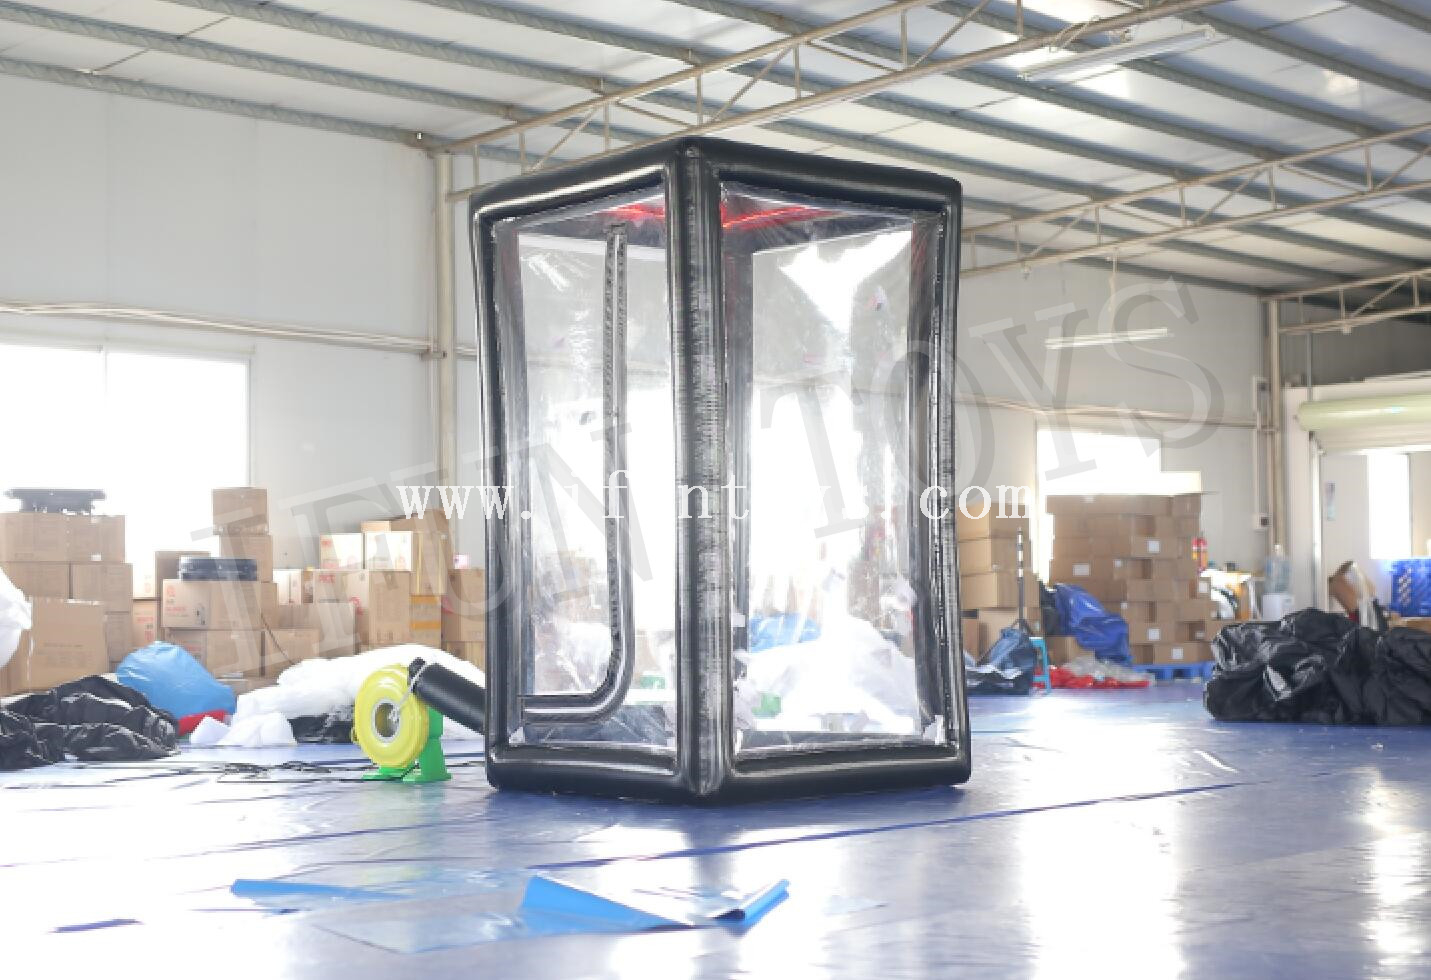 Air Sealed Inflatable Money Grab Booth / Cash Cube Money Machine Booth for Event